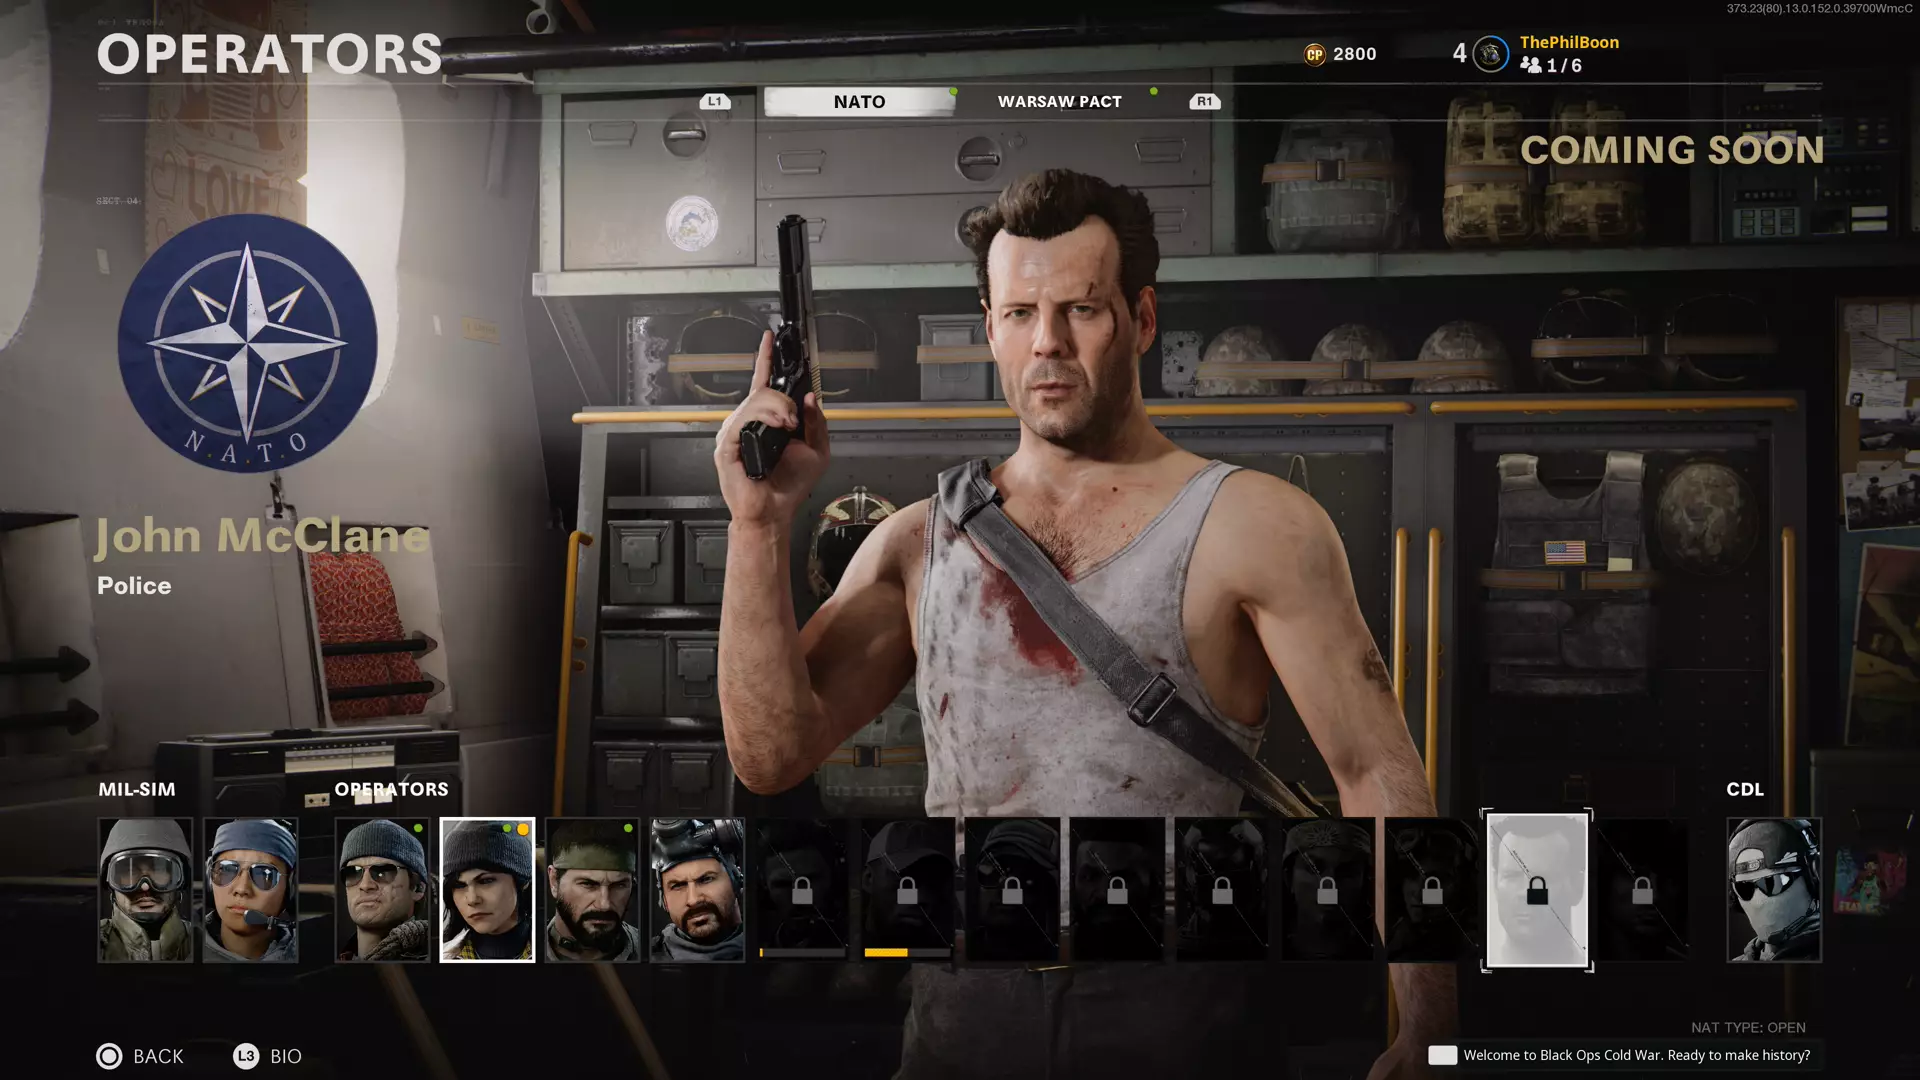 John McClane in Call of Duty: Black Ops Cold War /